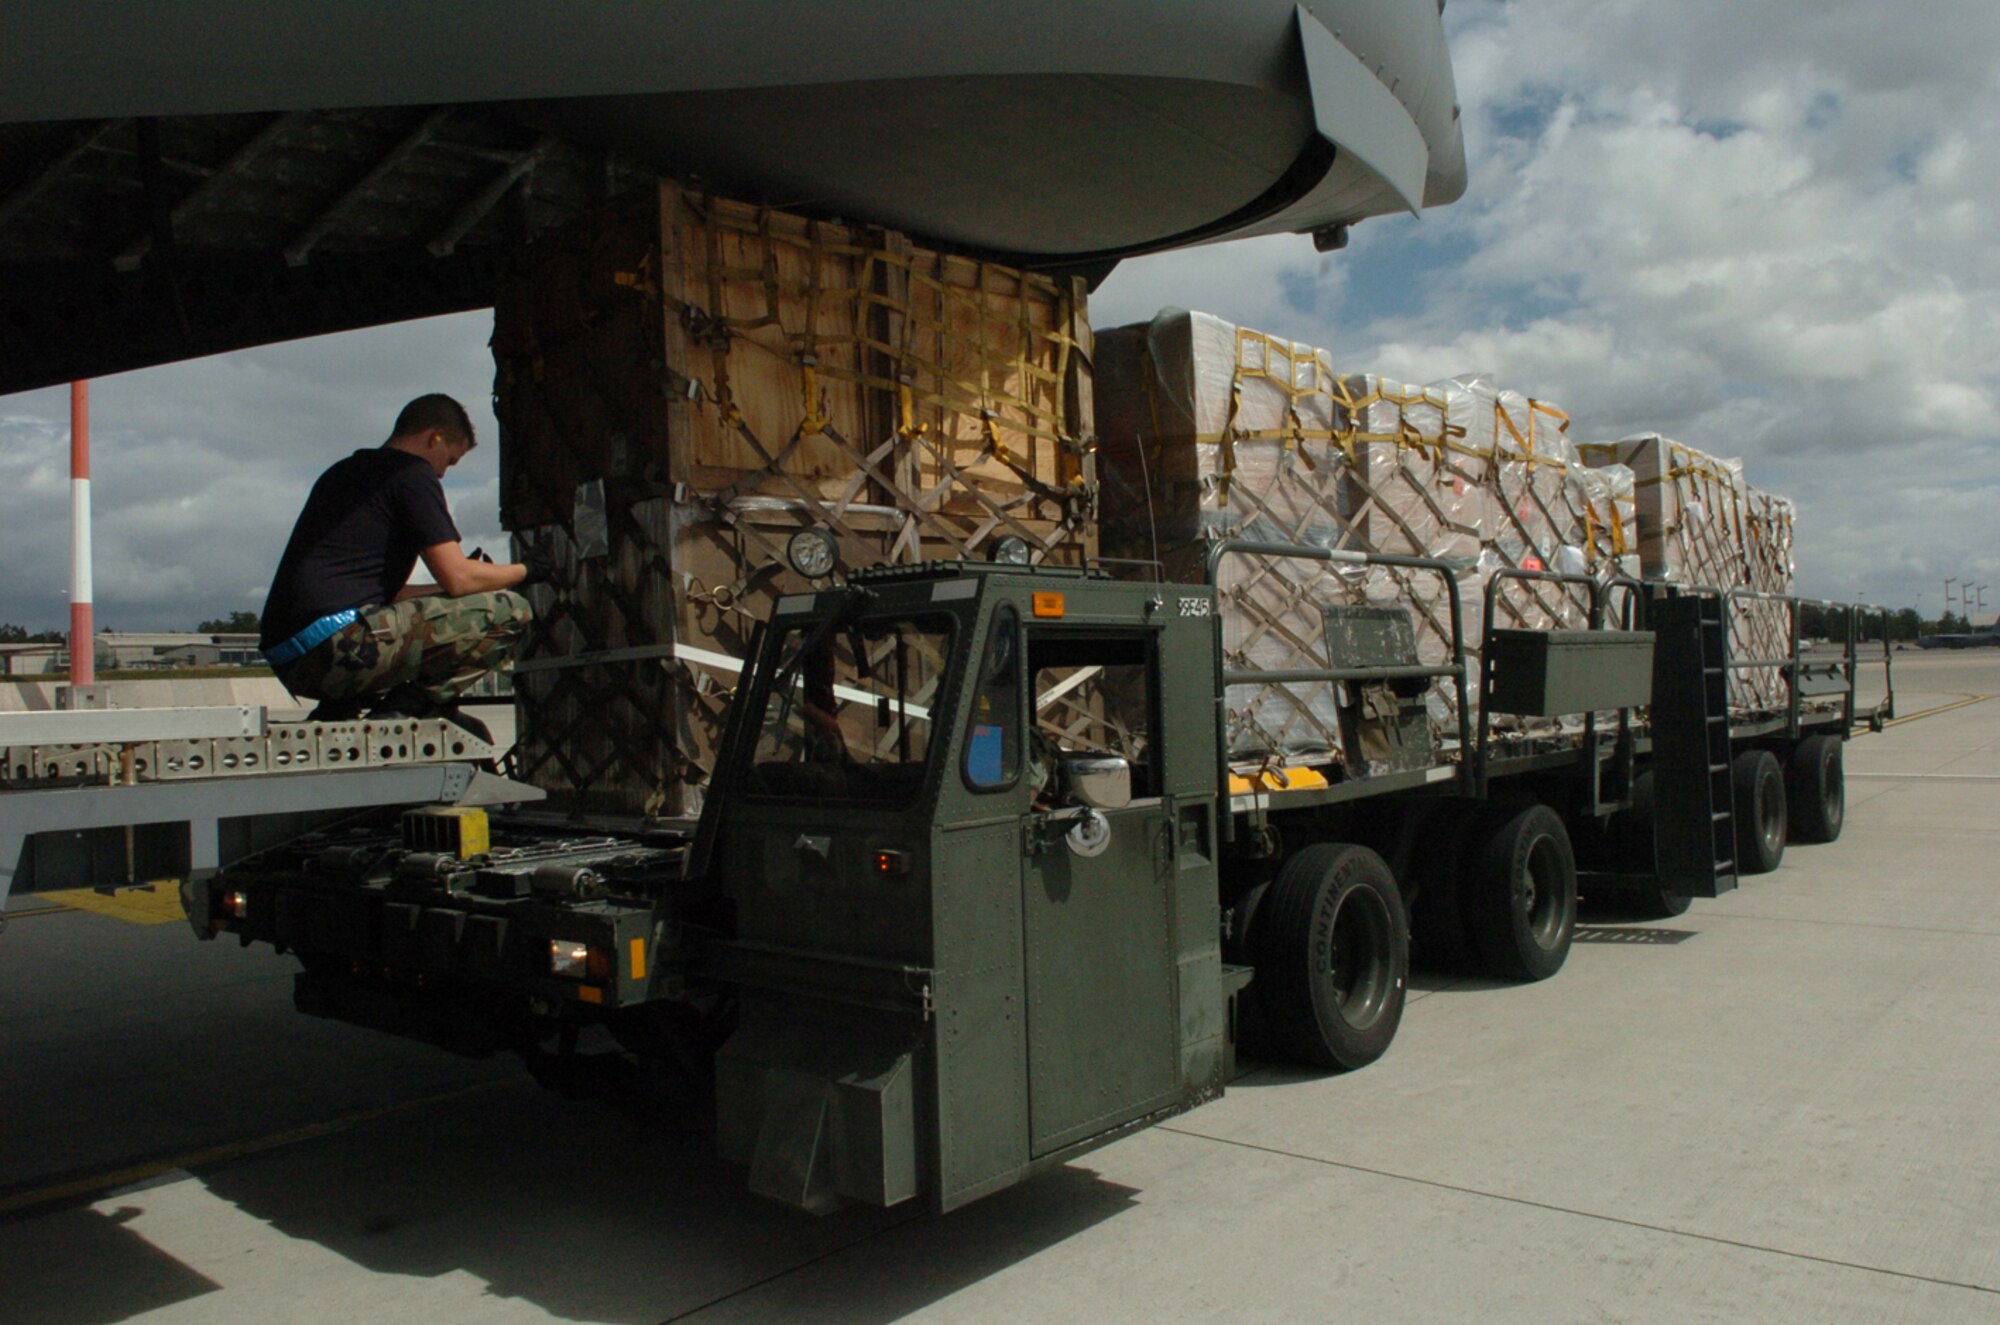 Air Force personnel from the 723rd Air Mobility Squadron moves the humanitarian supplies into position for loading in support of the humanitarian mission to Georgia.  Twentyeight Soldiers from the 66th Transportation Company, and the 39th Transportation Battalion, and Airmen from the 723rd Air Mobility Squadron worked 36 hours to palletize over 75,000 pounds of emergency shelter items and medical supplies which include tents, blankets, bedding, hygiene items, clothing, beds, cots, and medical supplies in order to support this mission to the Georgian people. (U.S. Air Force photo by Capt. Bryan Woods)(Released)